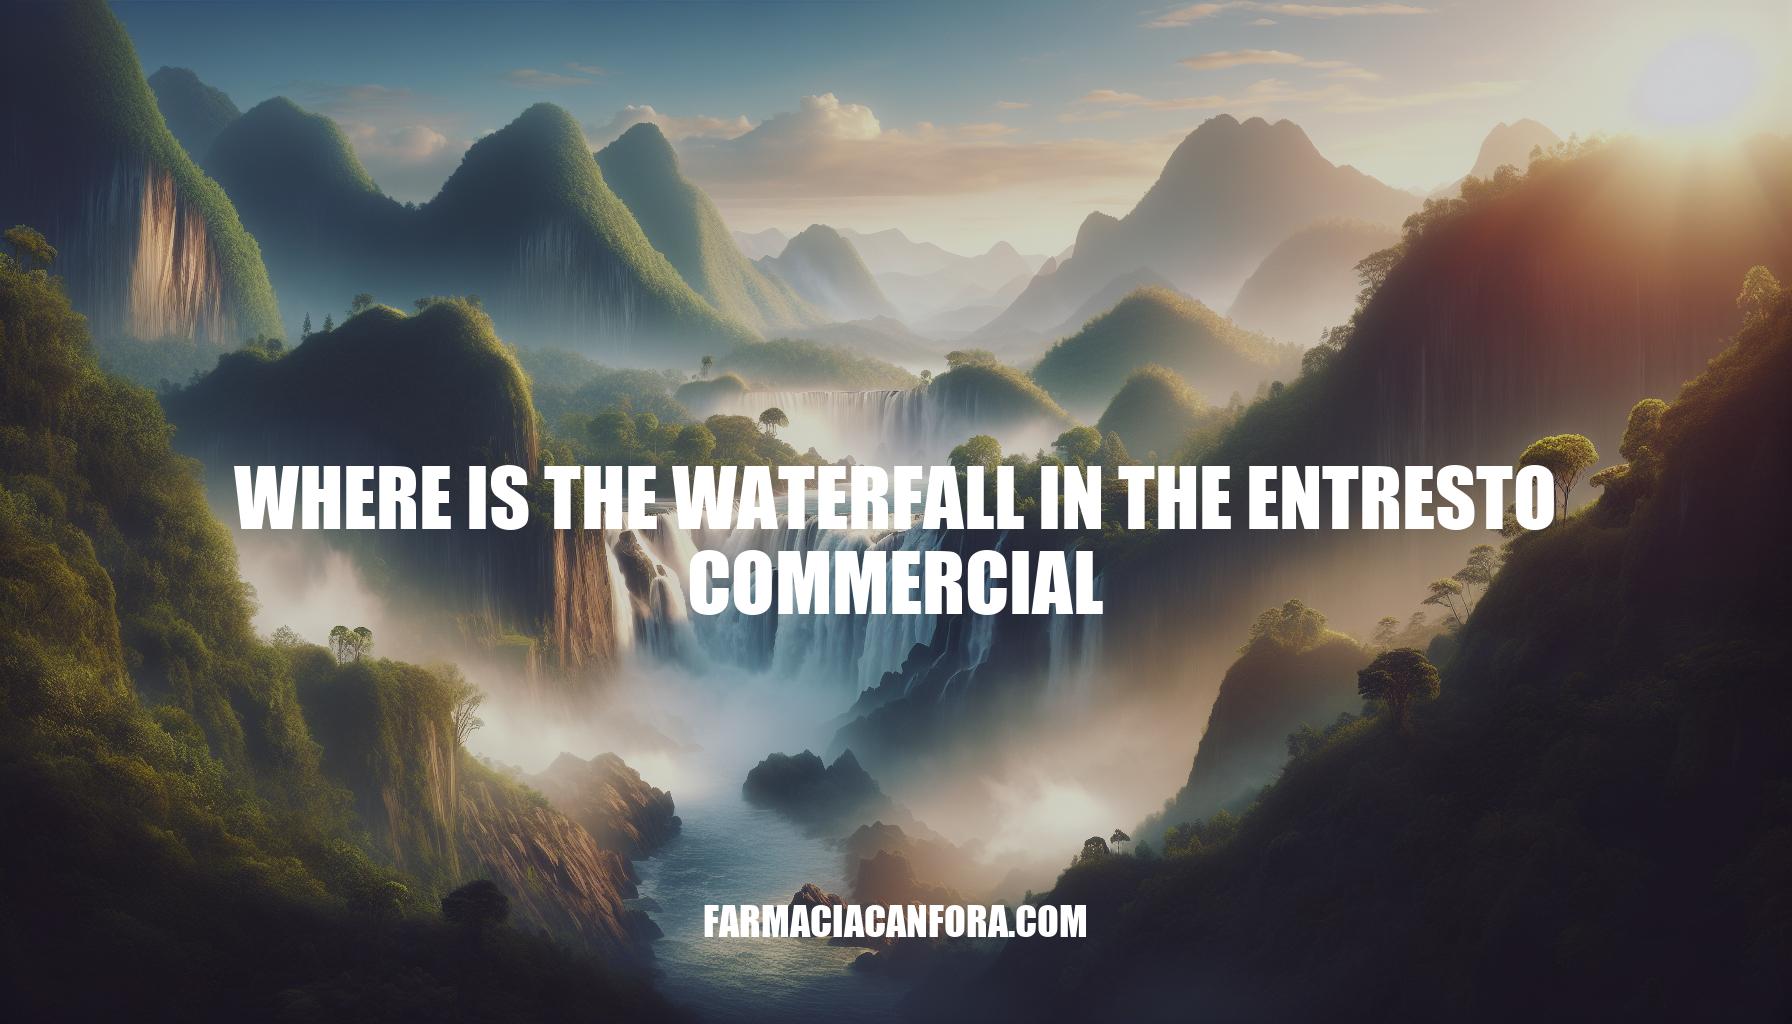 Where is the Waterfall in the Entresto Commercial